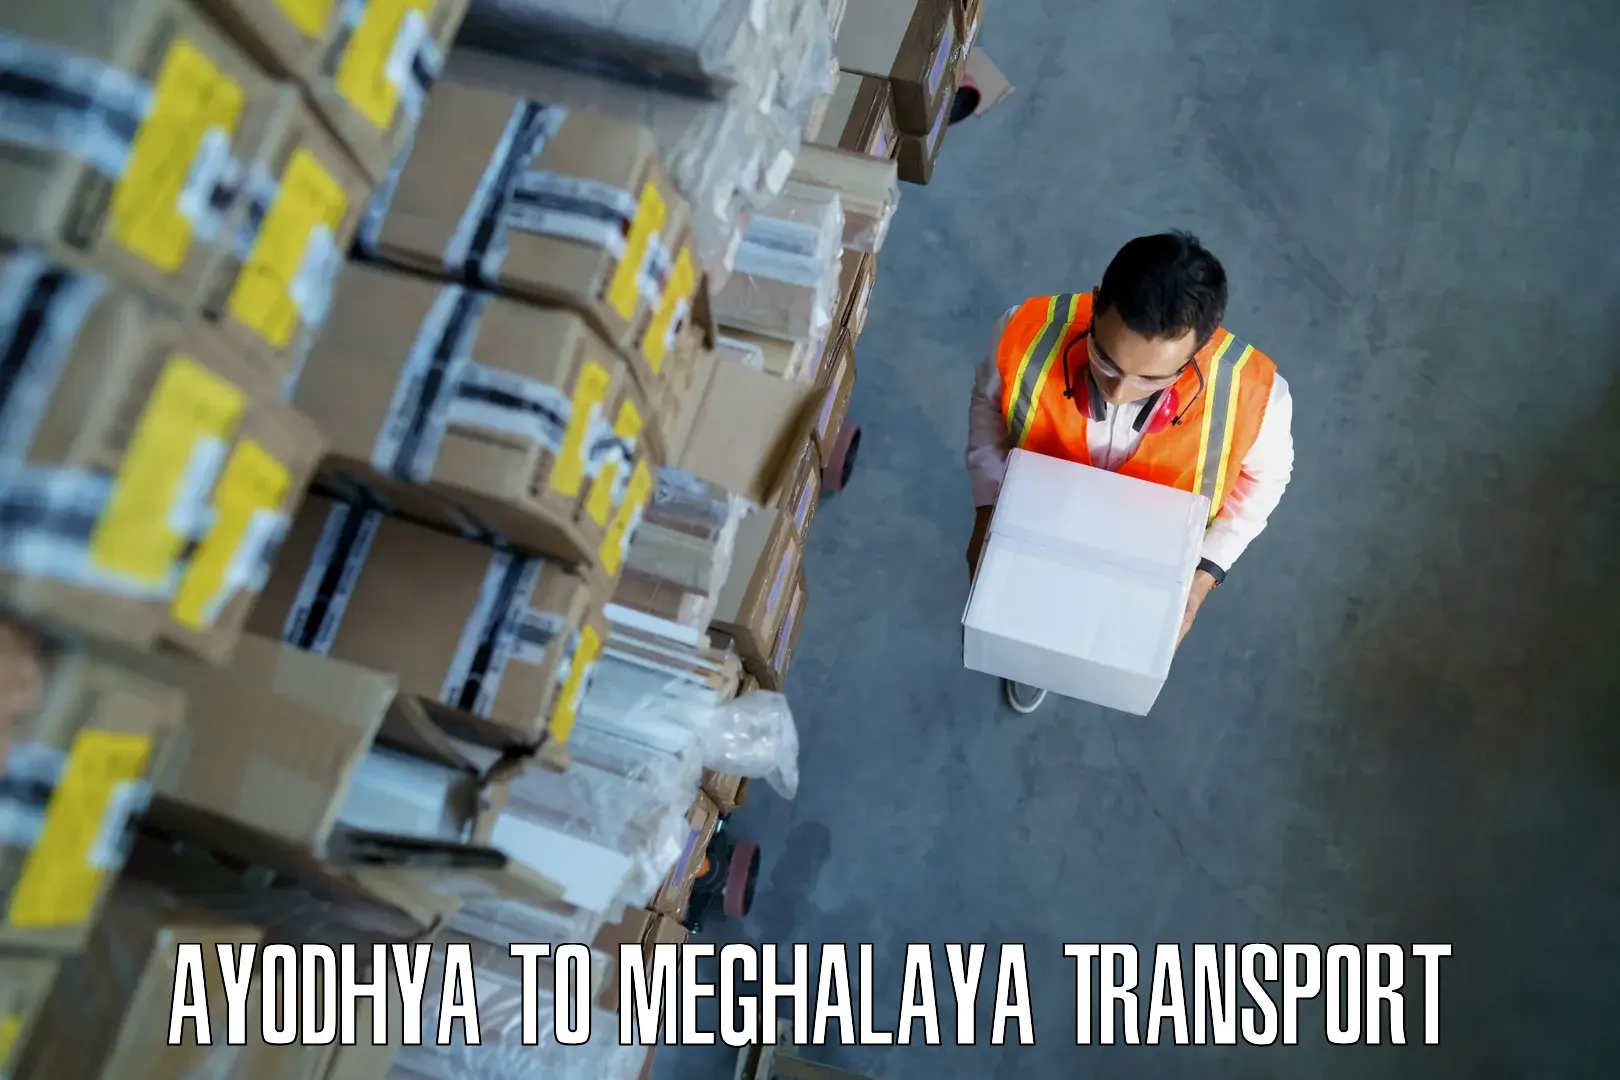 Cargo transport services in Ayodhya to Shillong